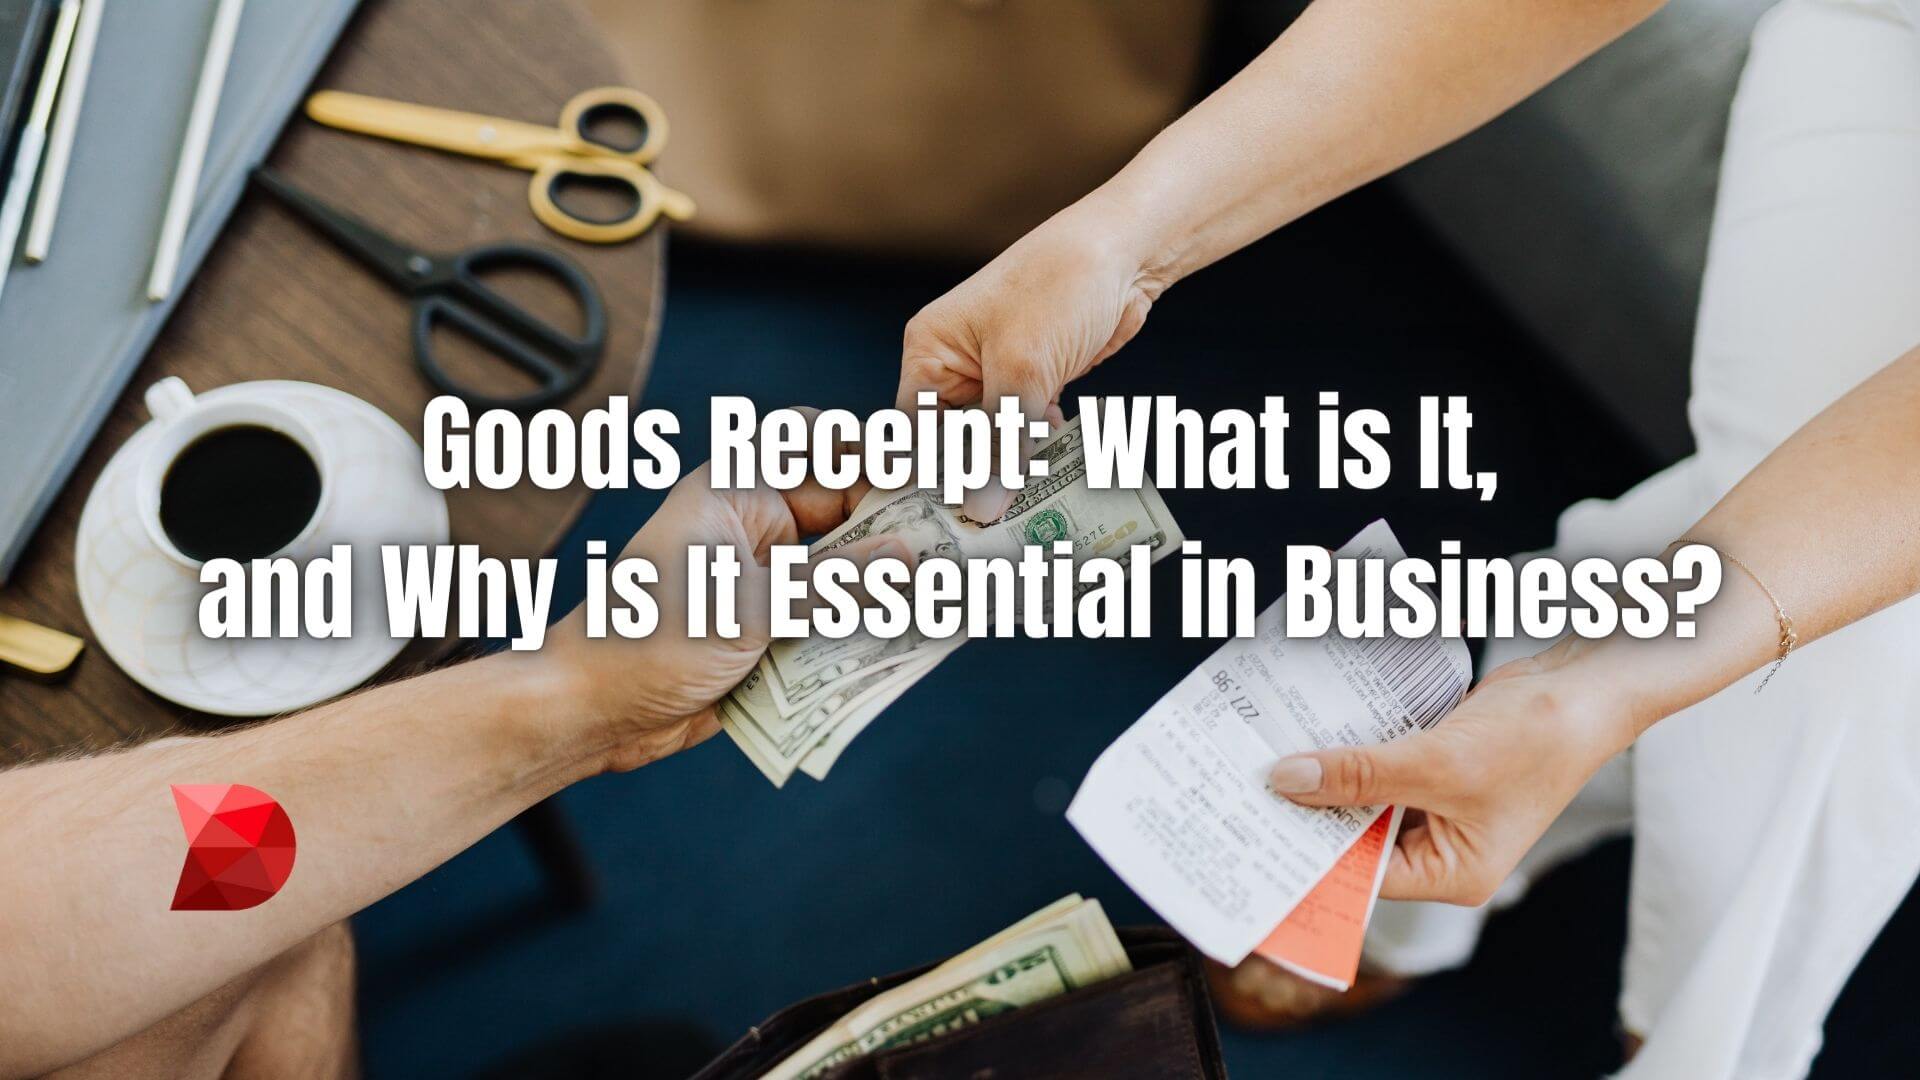 Discover the ins and outs of goods receipts in our essential guide. Click here to learn its significance for business success today!